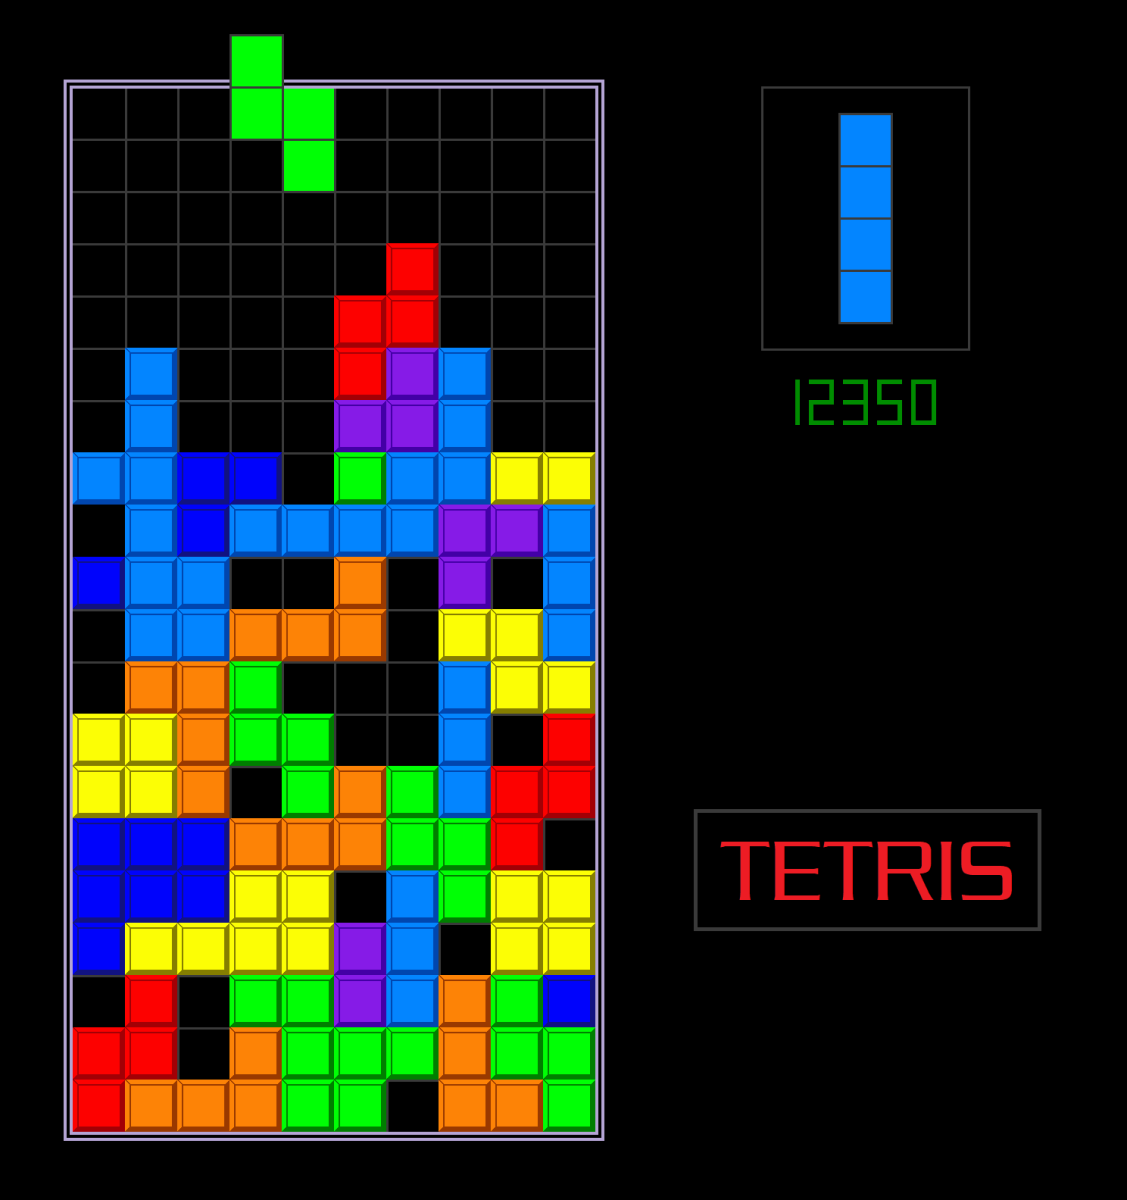 Tetris, which is a browser game that involves filling in empty spaces with blocks.